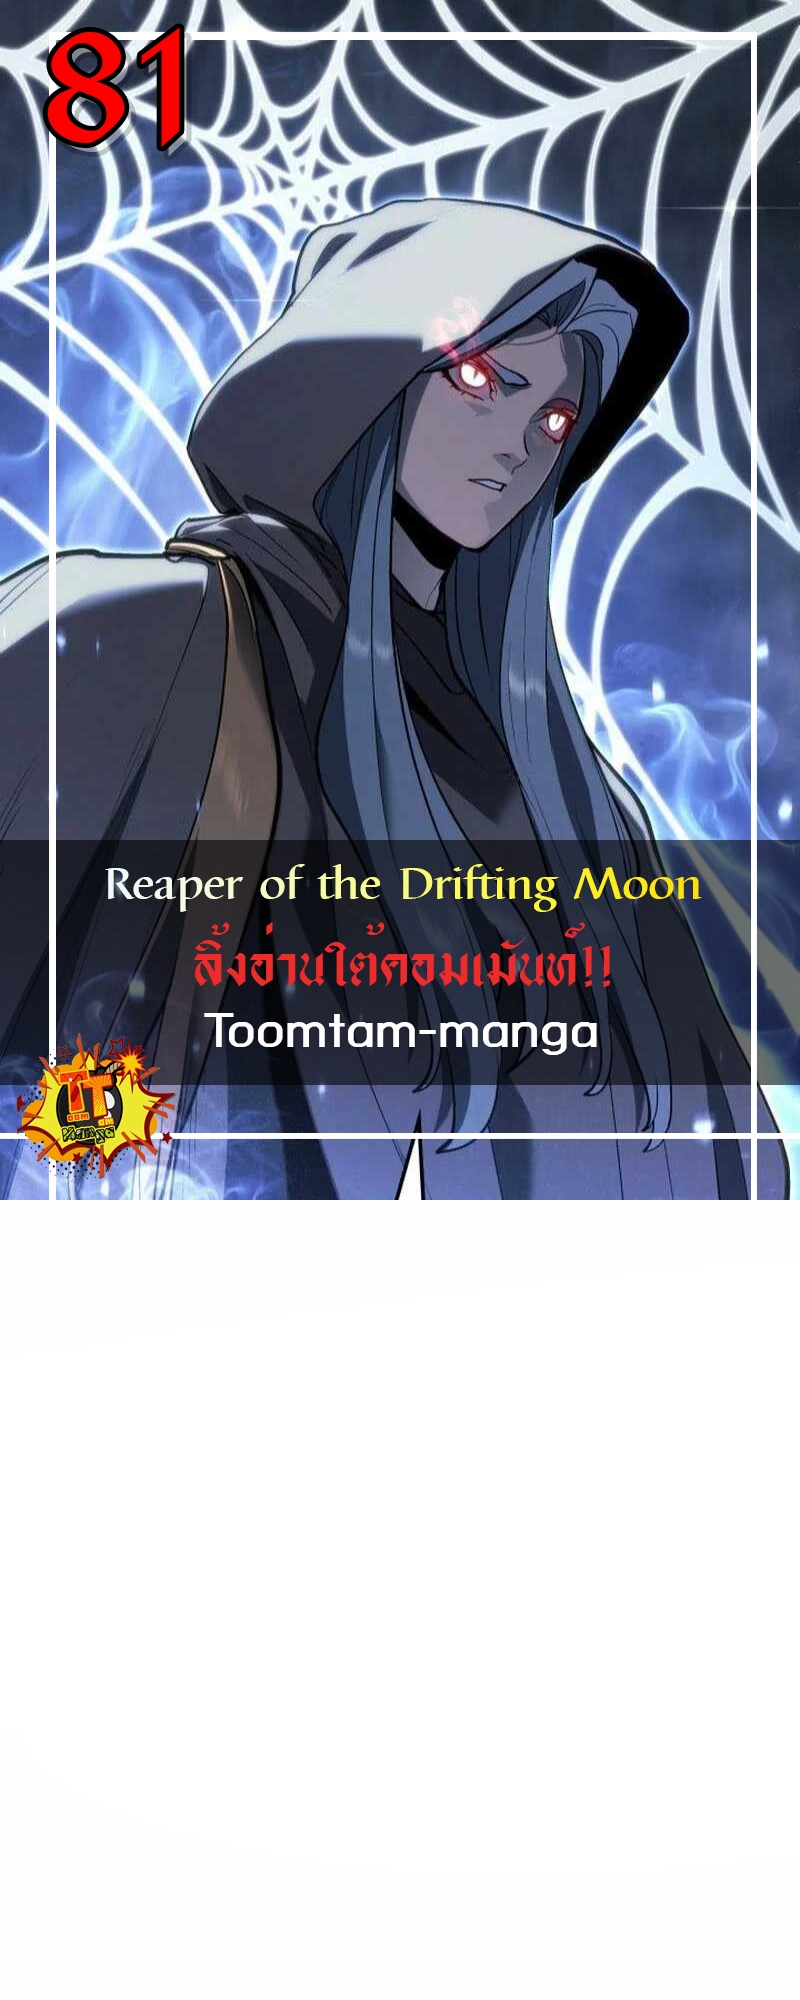 Reaper of the Drifting Moon 81 28 03 25670001